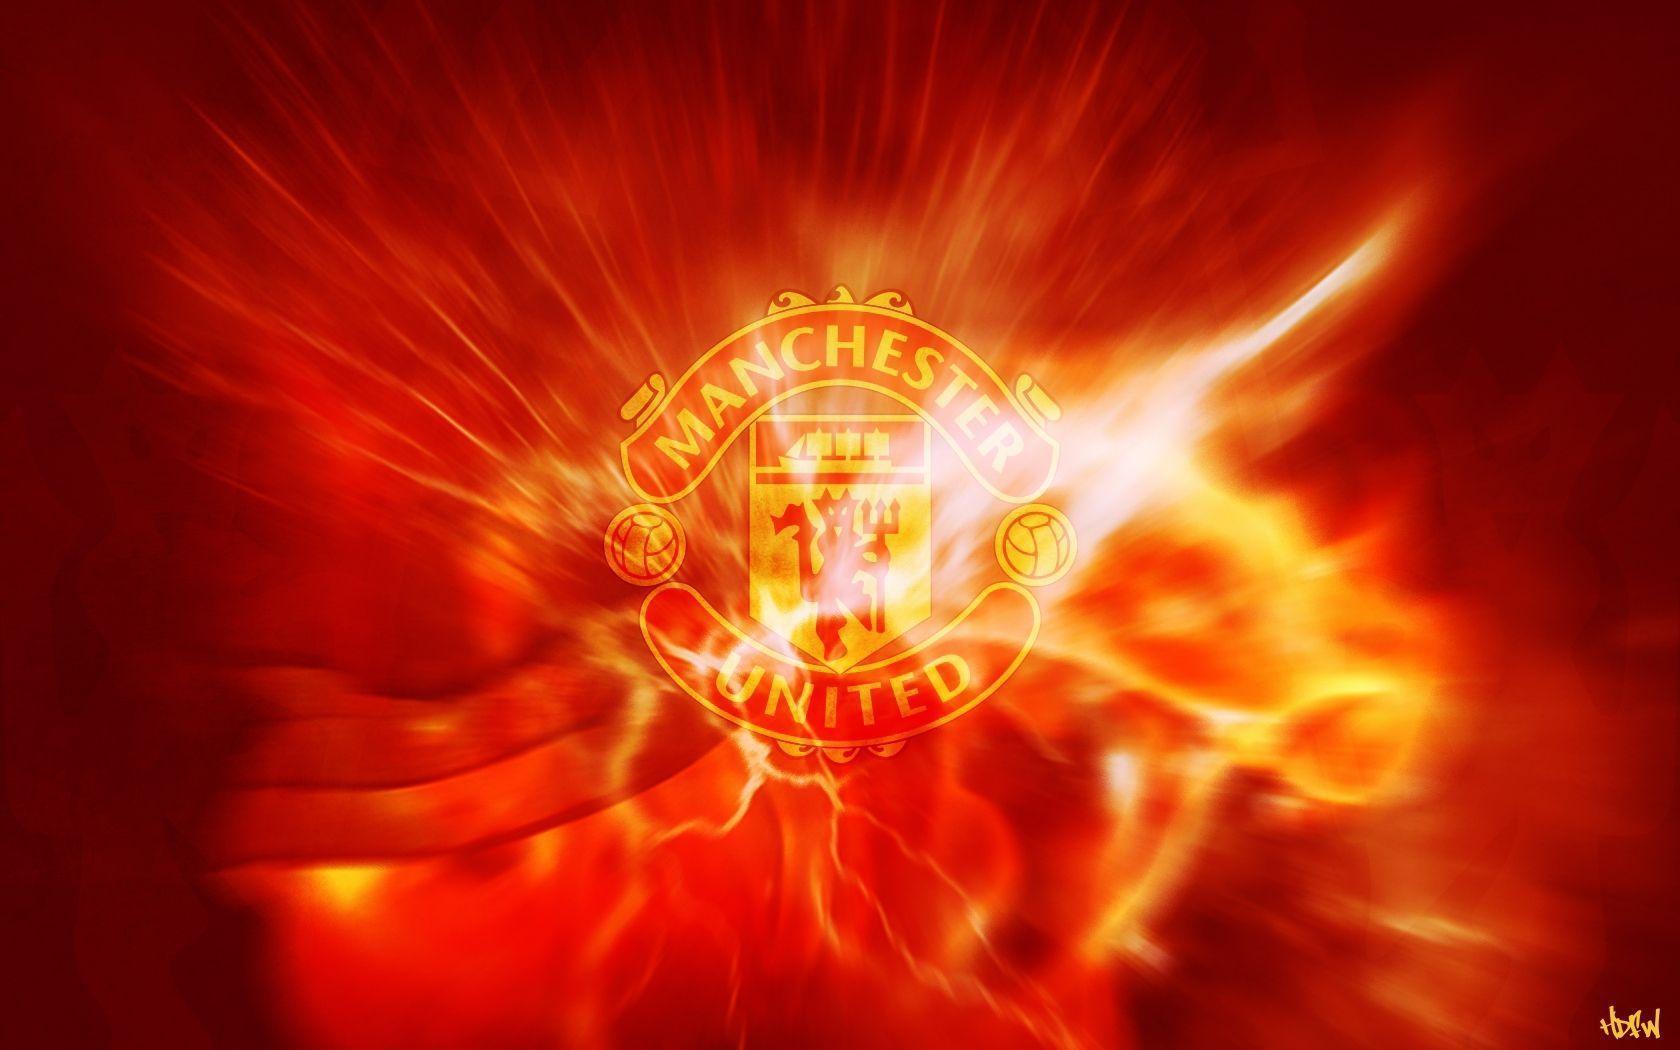 Exclusive Manchester United Wallpapers Manuwallhdcom